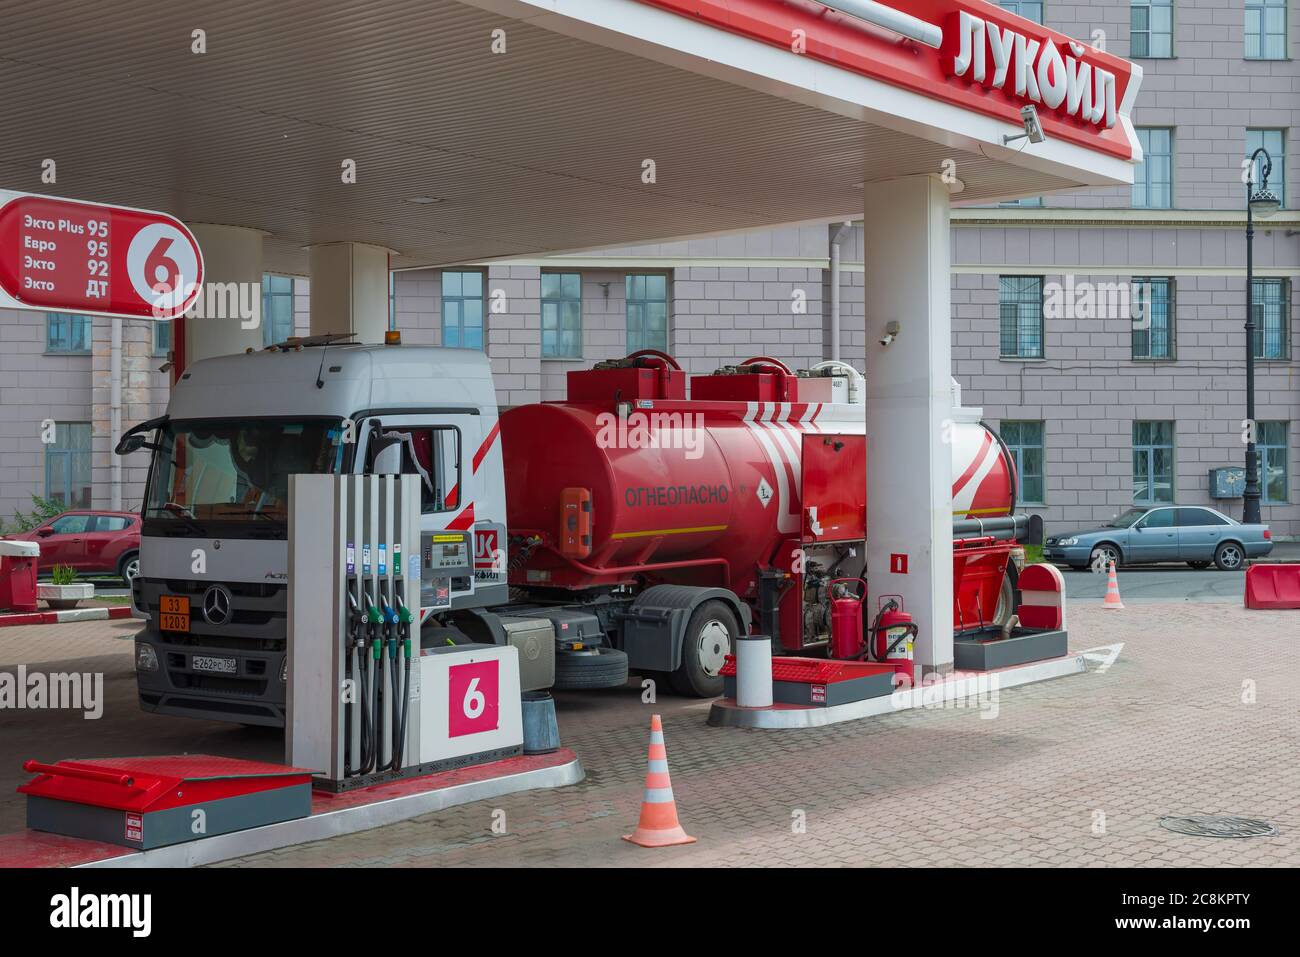 ST. PETERSBURG, RUSSIA - JULY 03, 2020: A fuel truck drains fuel at a car filling station Stock Photo